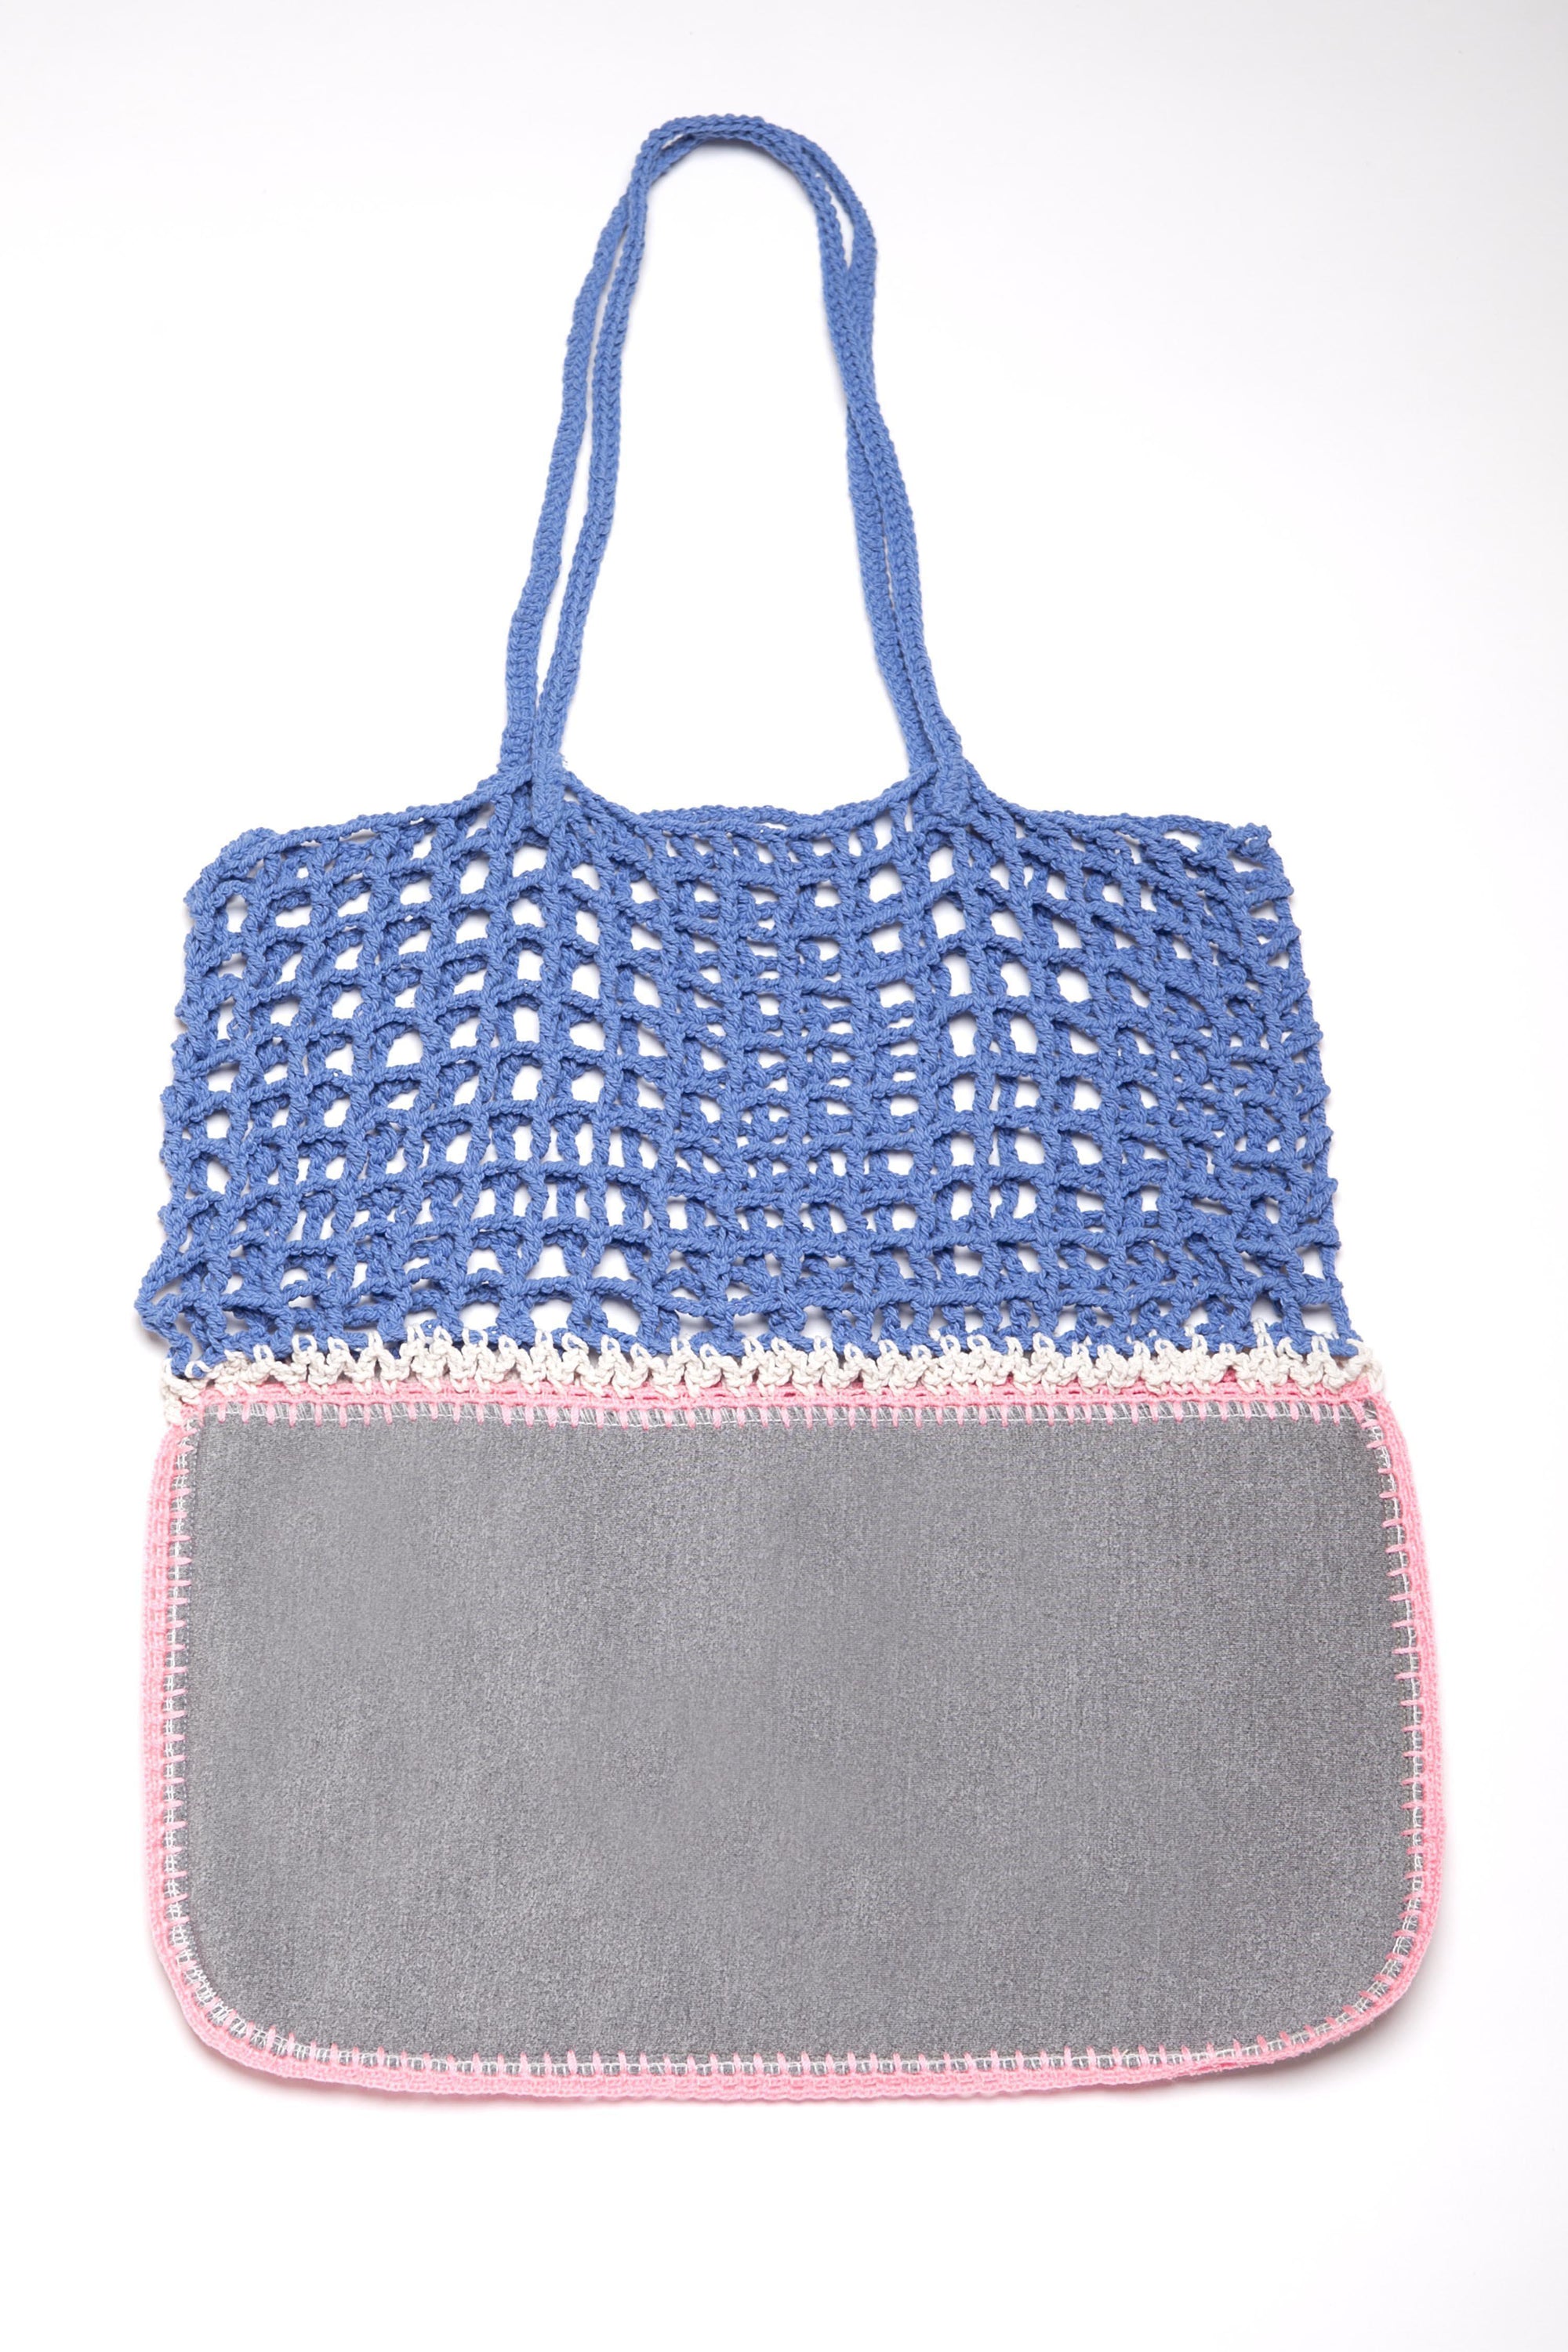 Gradie Grey and Blue Crochet and Neoprene Bag-Merrymetric Bags-Temples and Markets